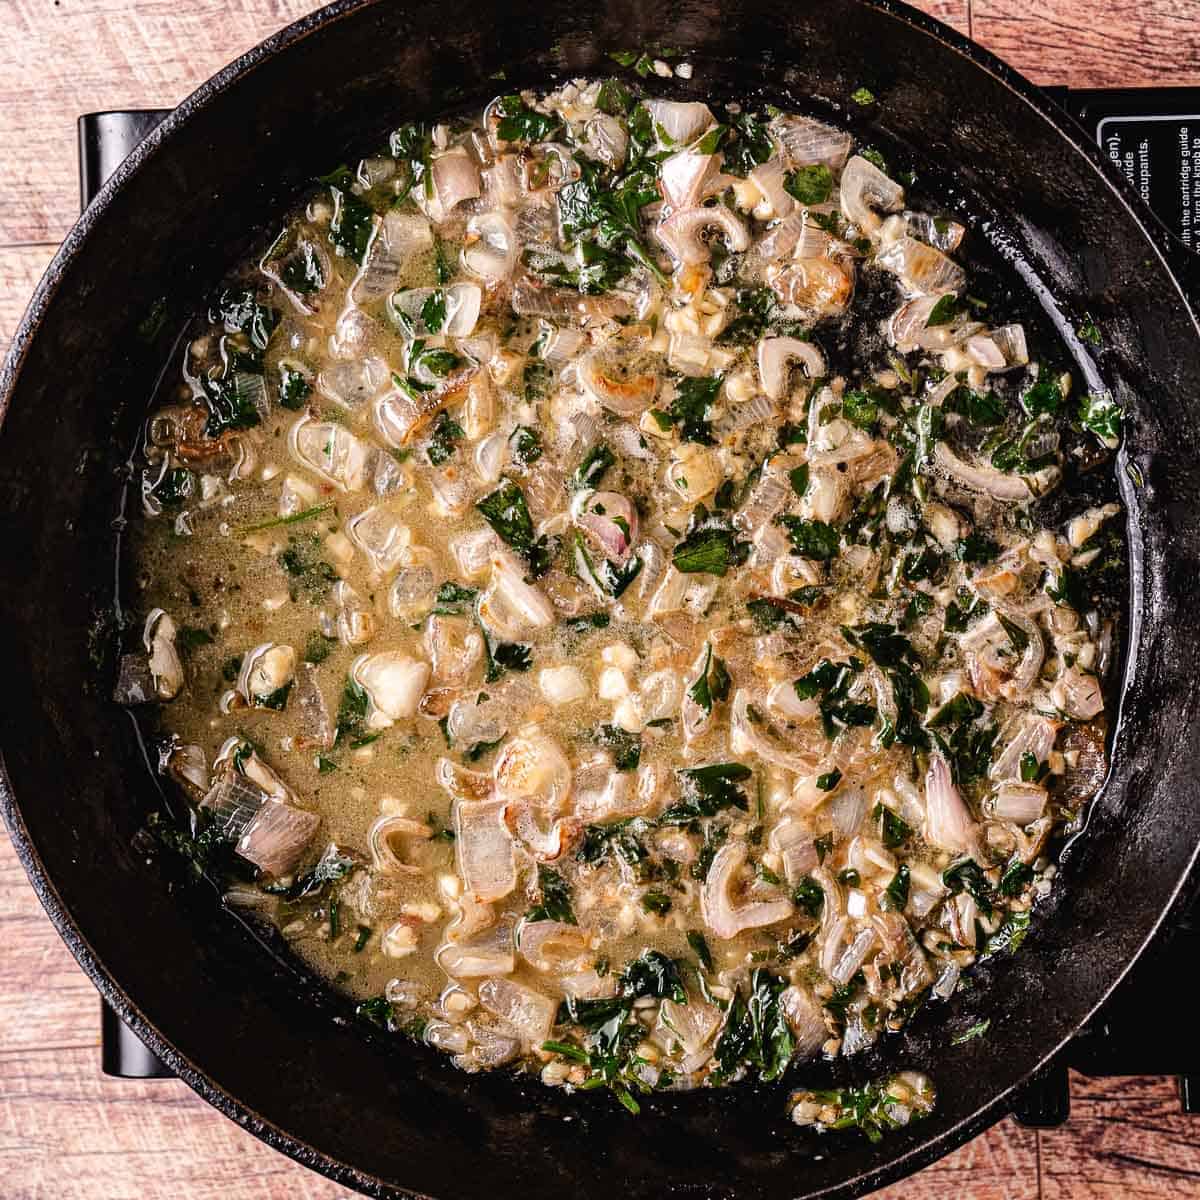 garlic, shallots, and parsley cooking in oil